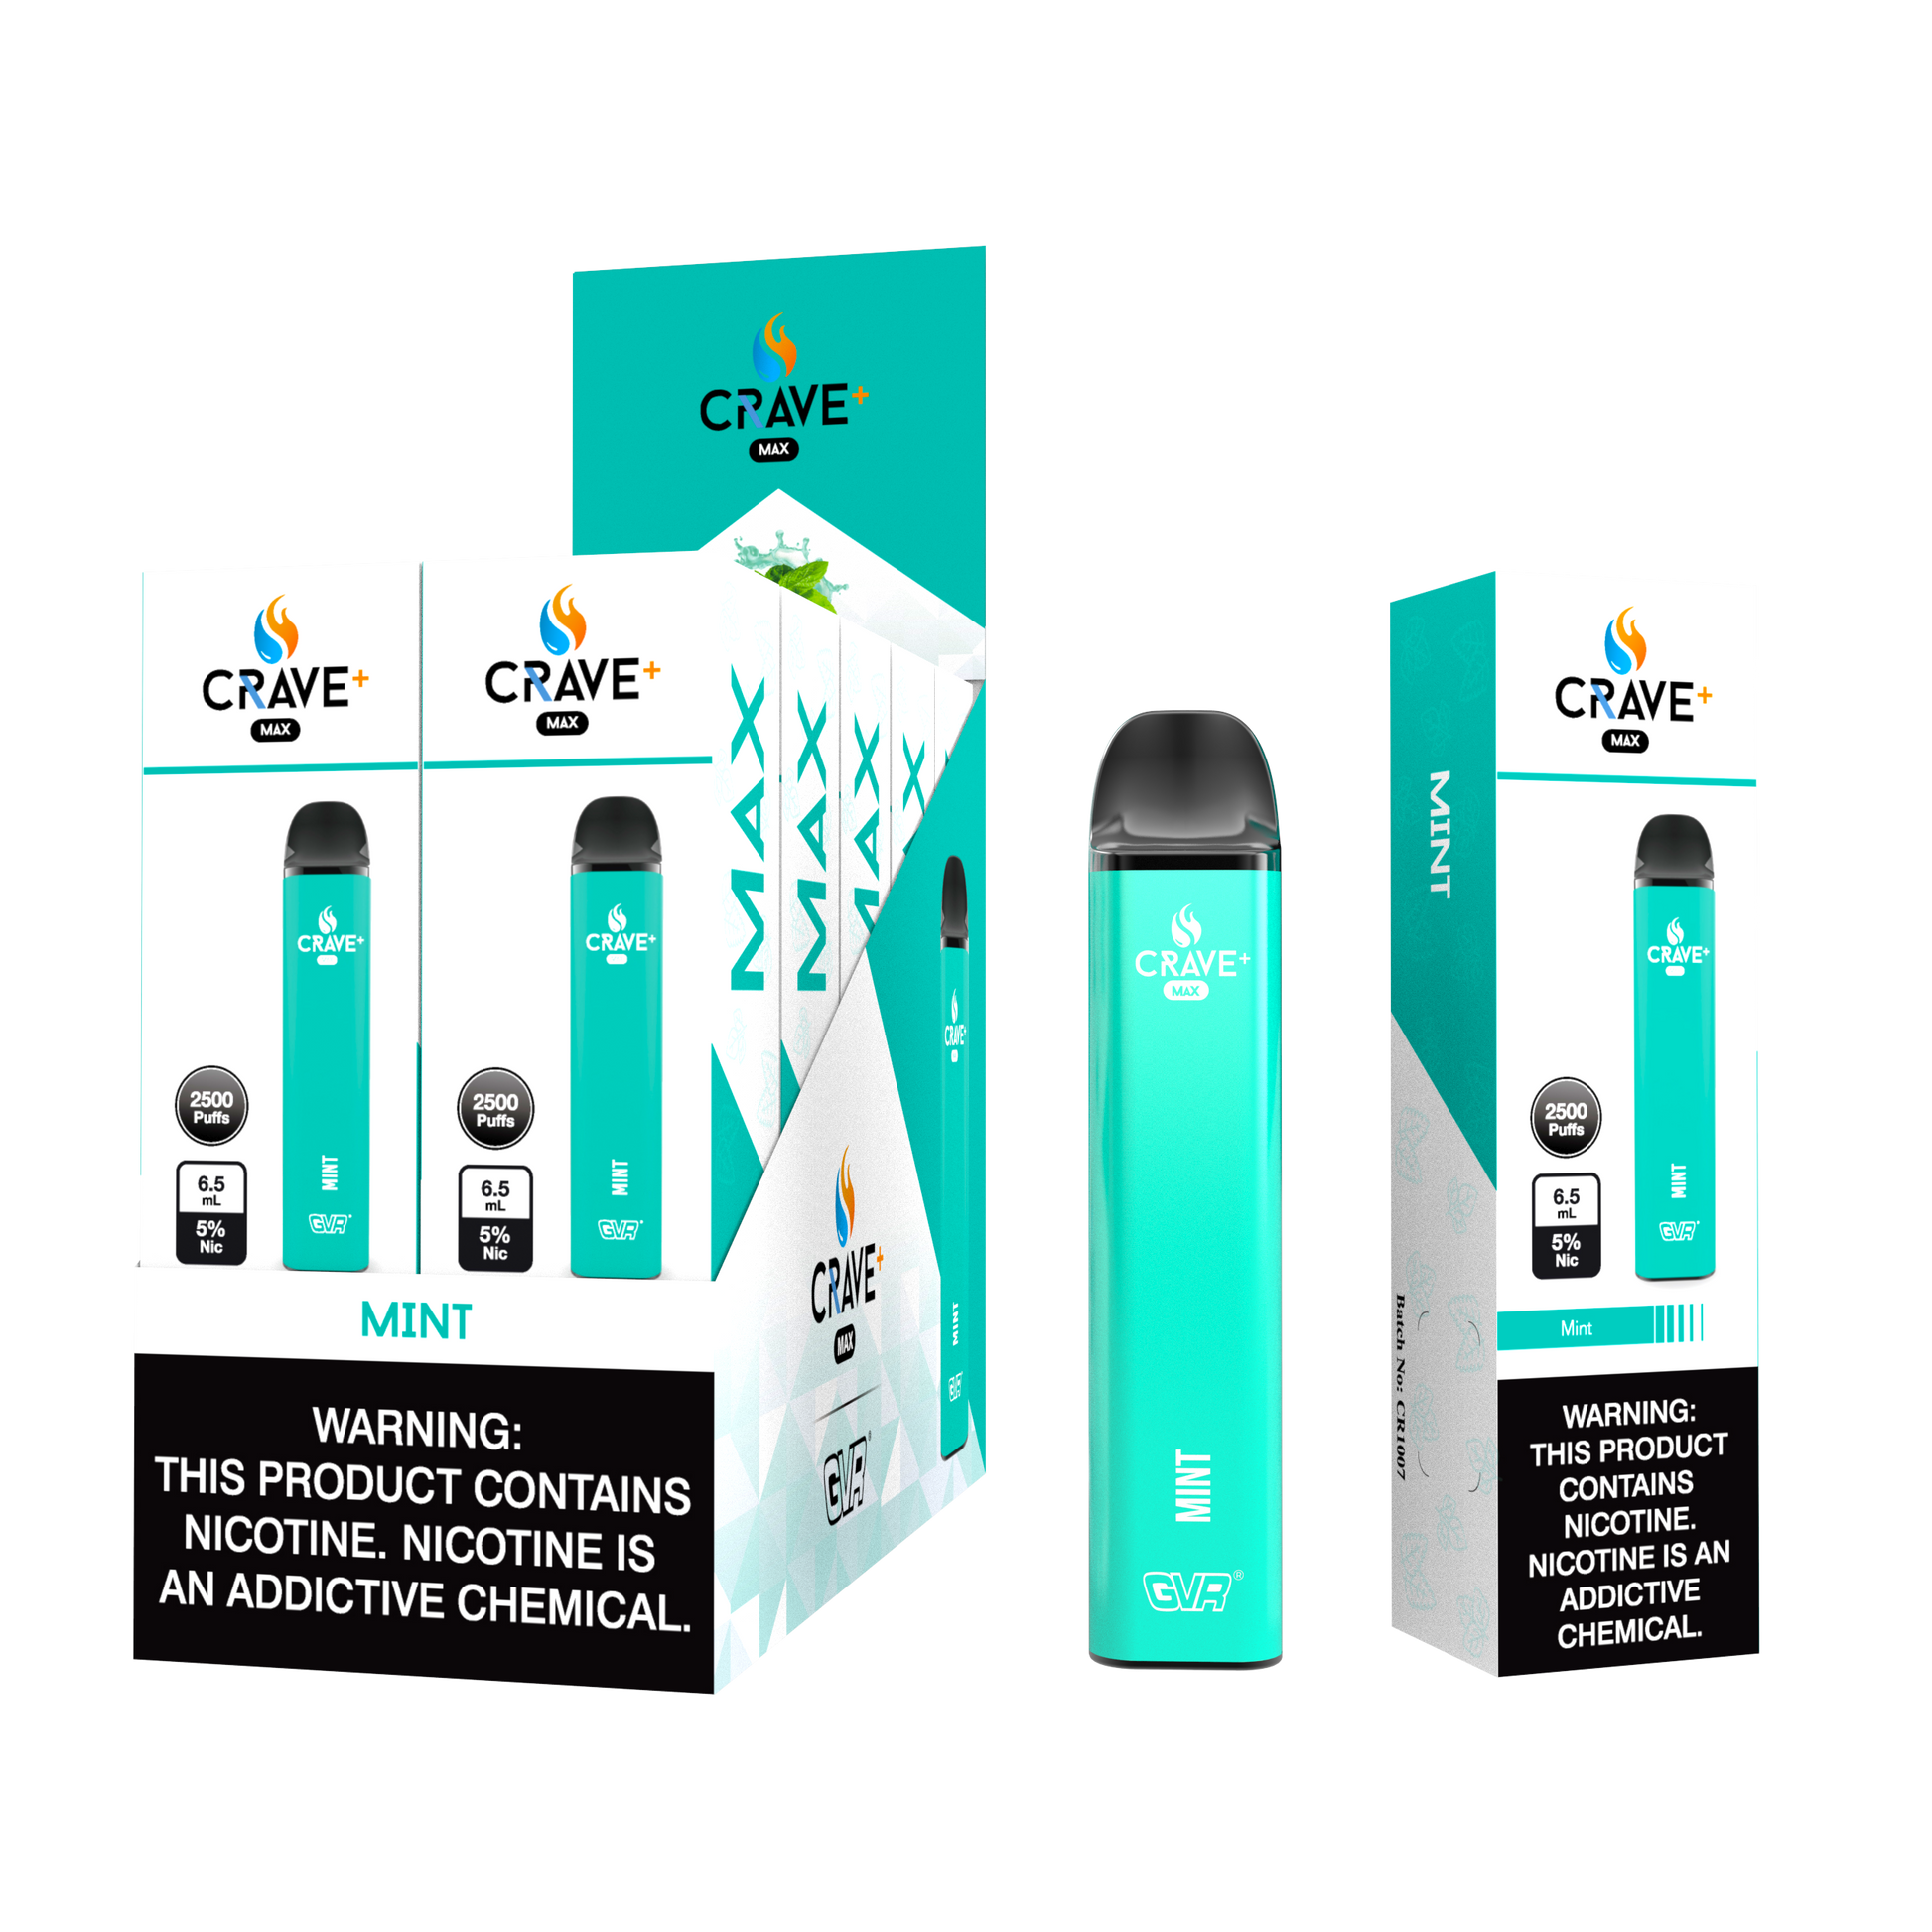 crave max, crave vape, buy crave max, crave max for sale, crave max flavors, crave flavors vape, buy crave vape online, crave max gvr, crave 2500 puffs, crave clear, crave max clear, crave clear 3%, crave clear 5%, crave max 3%, crave max 5%, crave 3%, crave 5%, crave vape clear, vape clear flavor, crave flavor clear, crave max mint, crave mint, crave max mint flavor, crave mint flavor, crave max disposable 2500 puffs,  crave max bulk, crave disposable bulk, crave max mint, crave max disposable